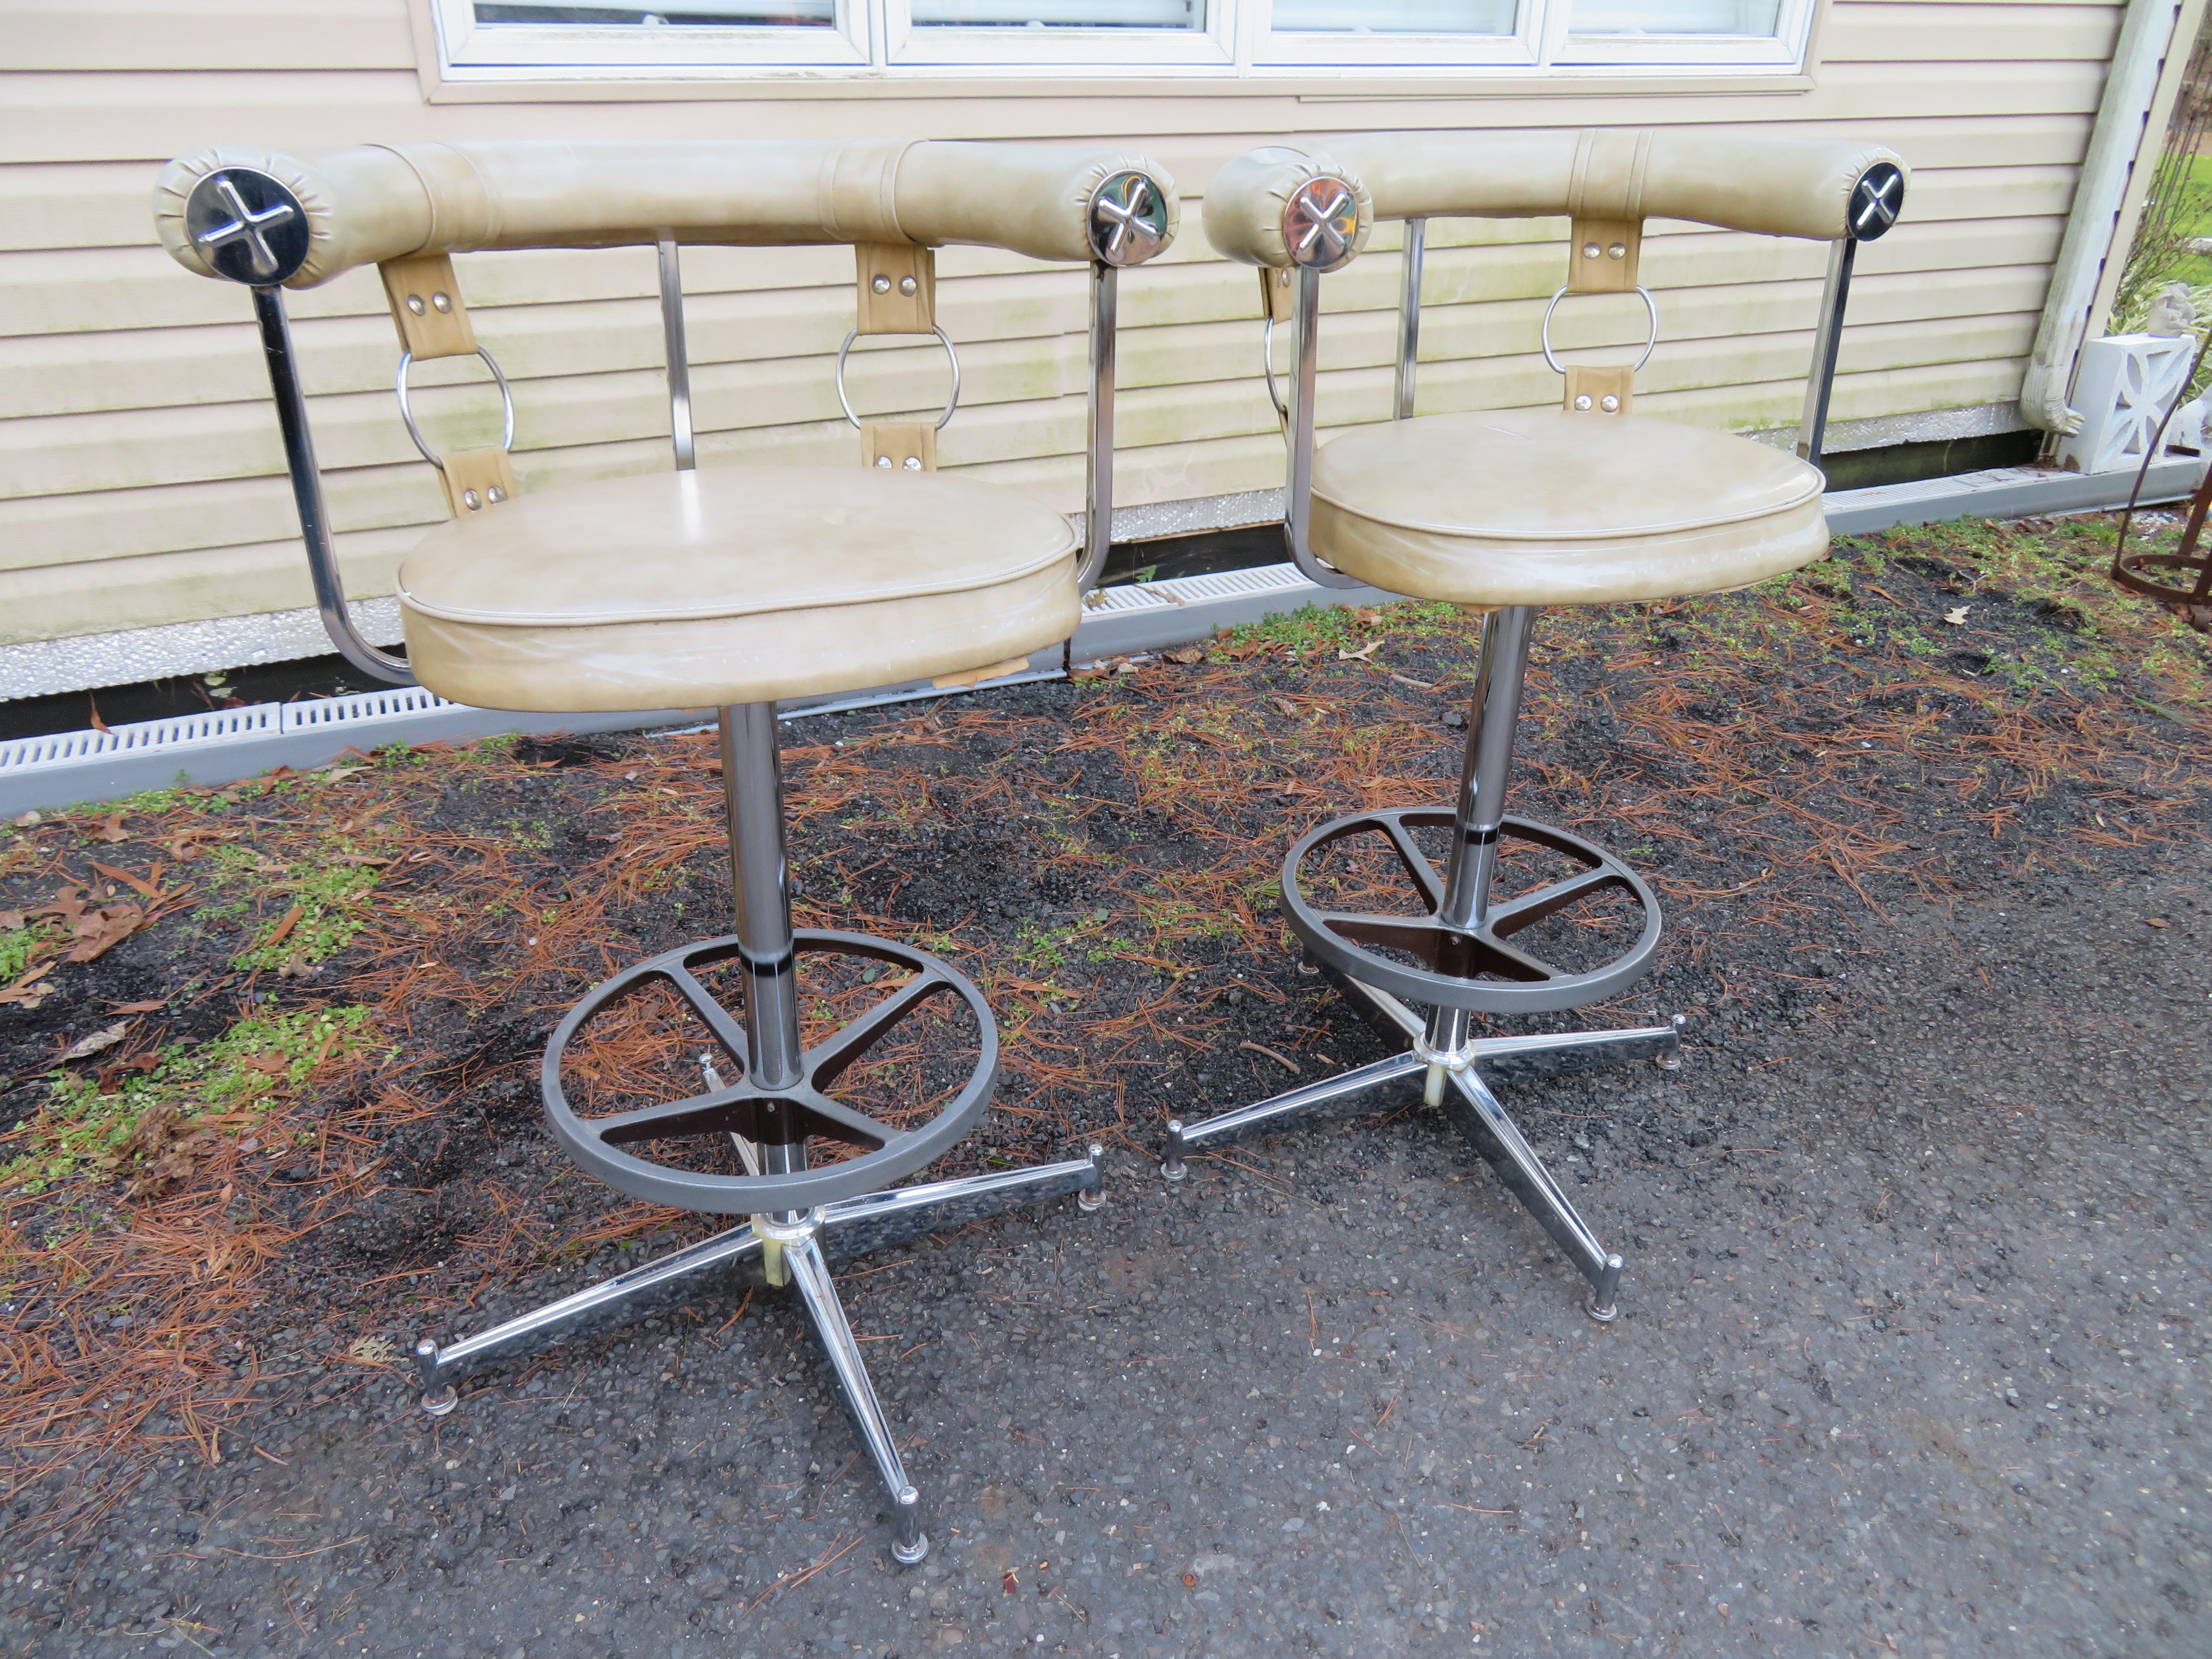 A set of 2 Gucci style chrome bar stools with faux leather seats and fun giant rings with straps. These will need to be reupholstered but we just love the thick rolled backrest with large chromed embossed end caps-very stylish. We think these would